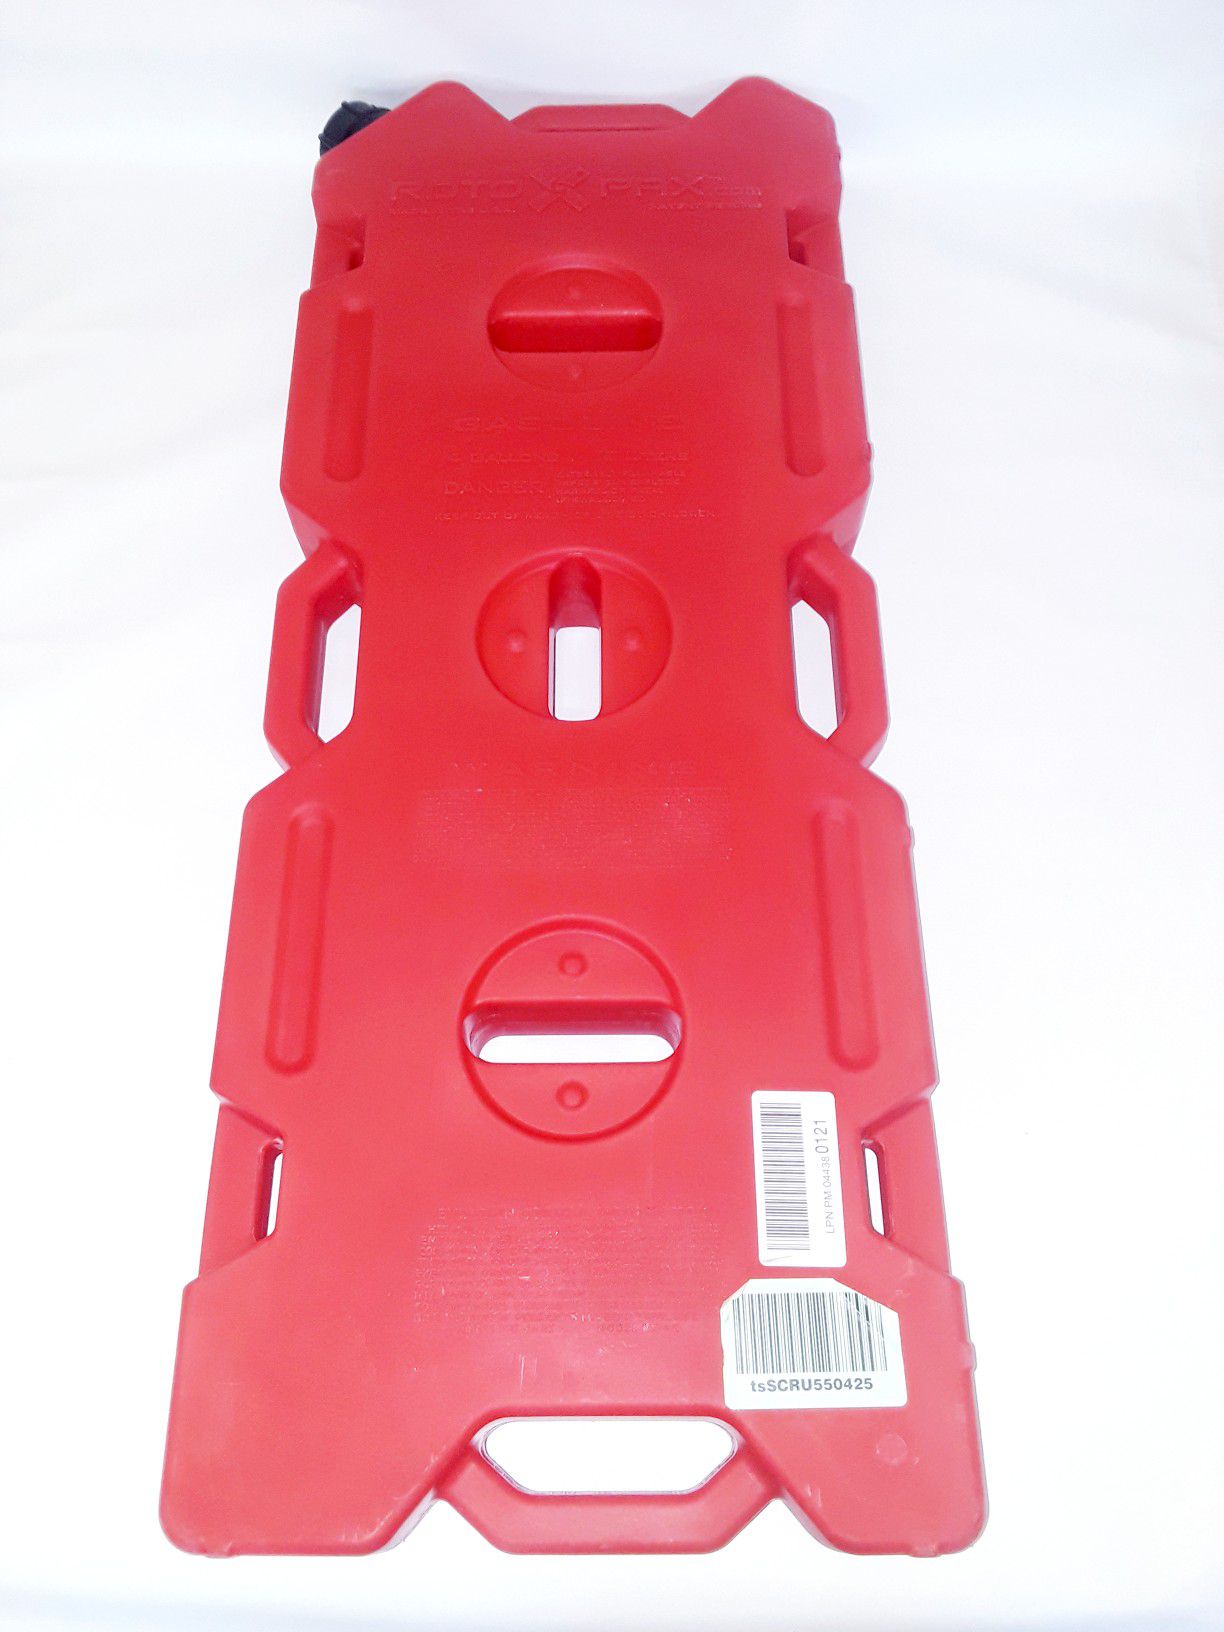 RotoPax 4 Gallon Fuel Tank Red 35 × 13.5 × 3.5 inches